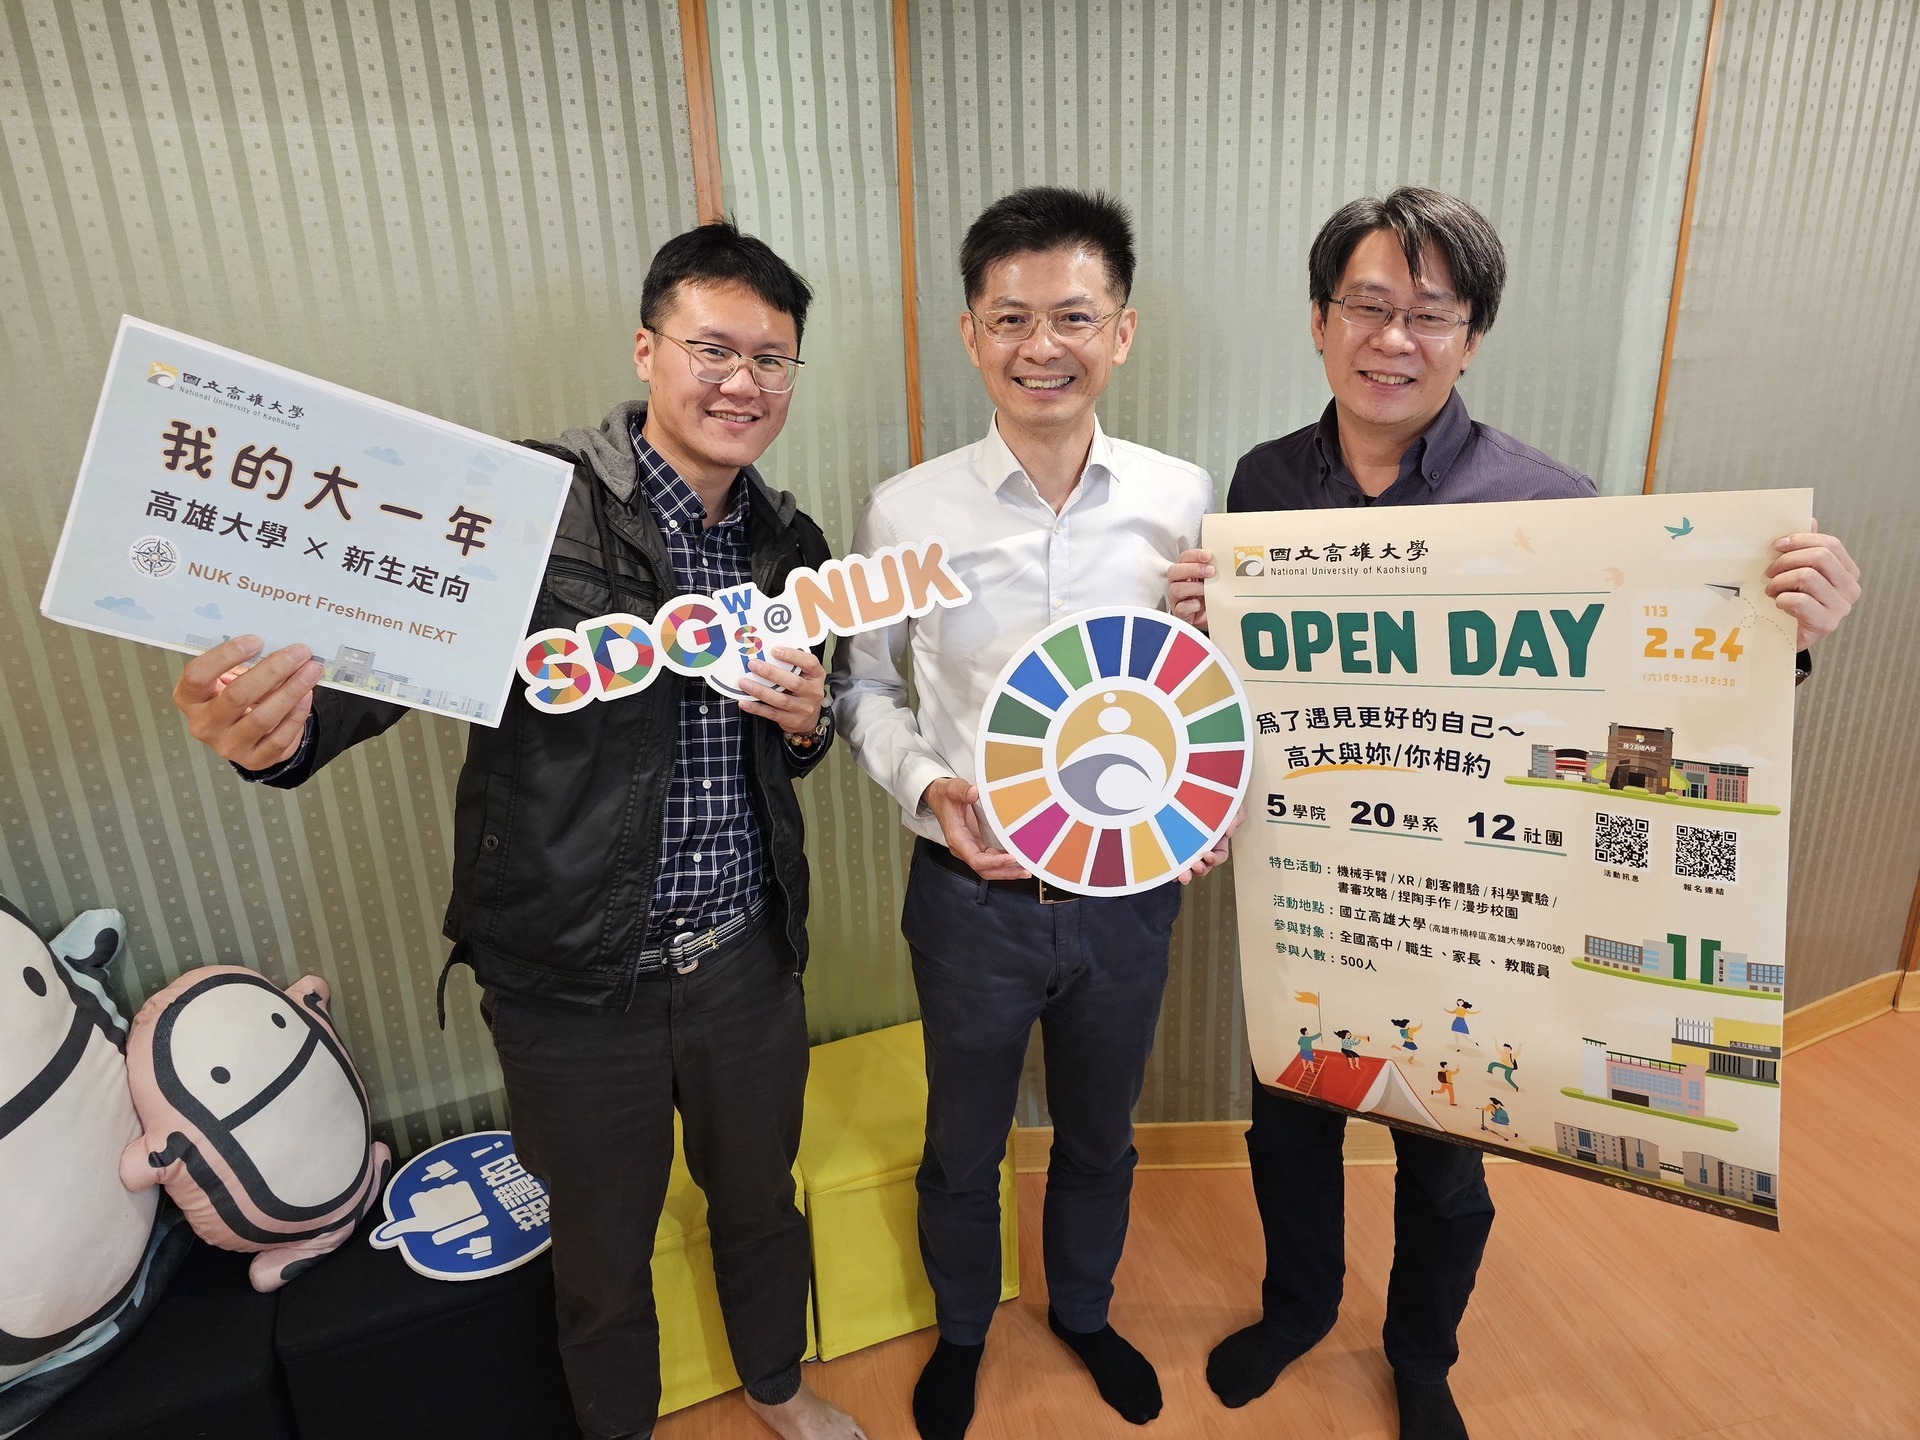 National University of Kaohsiung will hold its Open Day on Saturday, the 24th of this month.